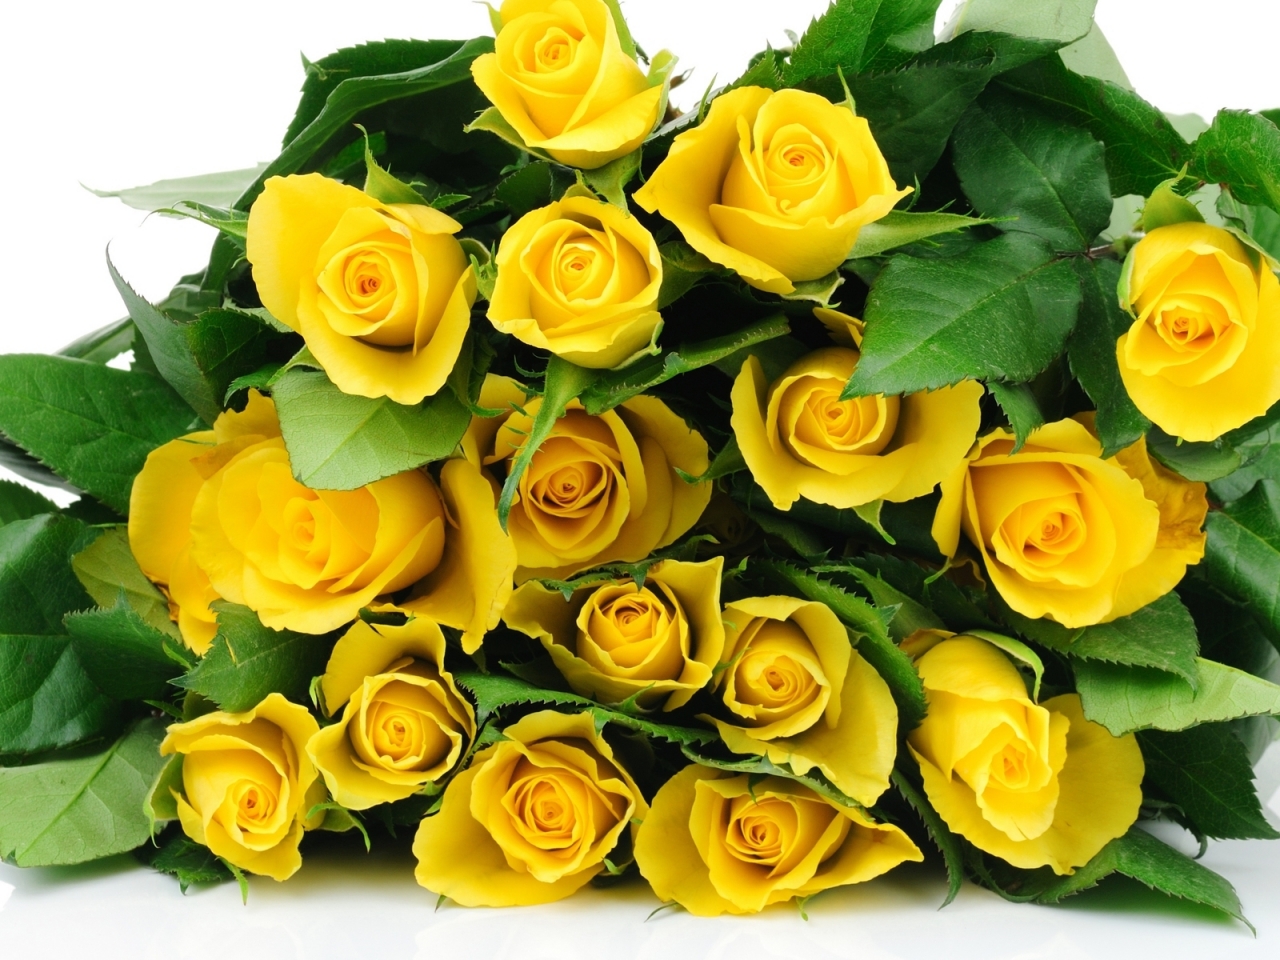 Yellow Roses Bucket for 1280 x 960 resolution